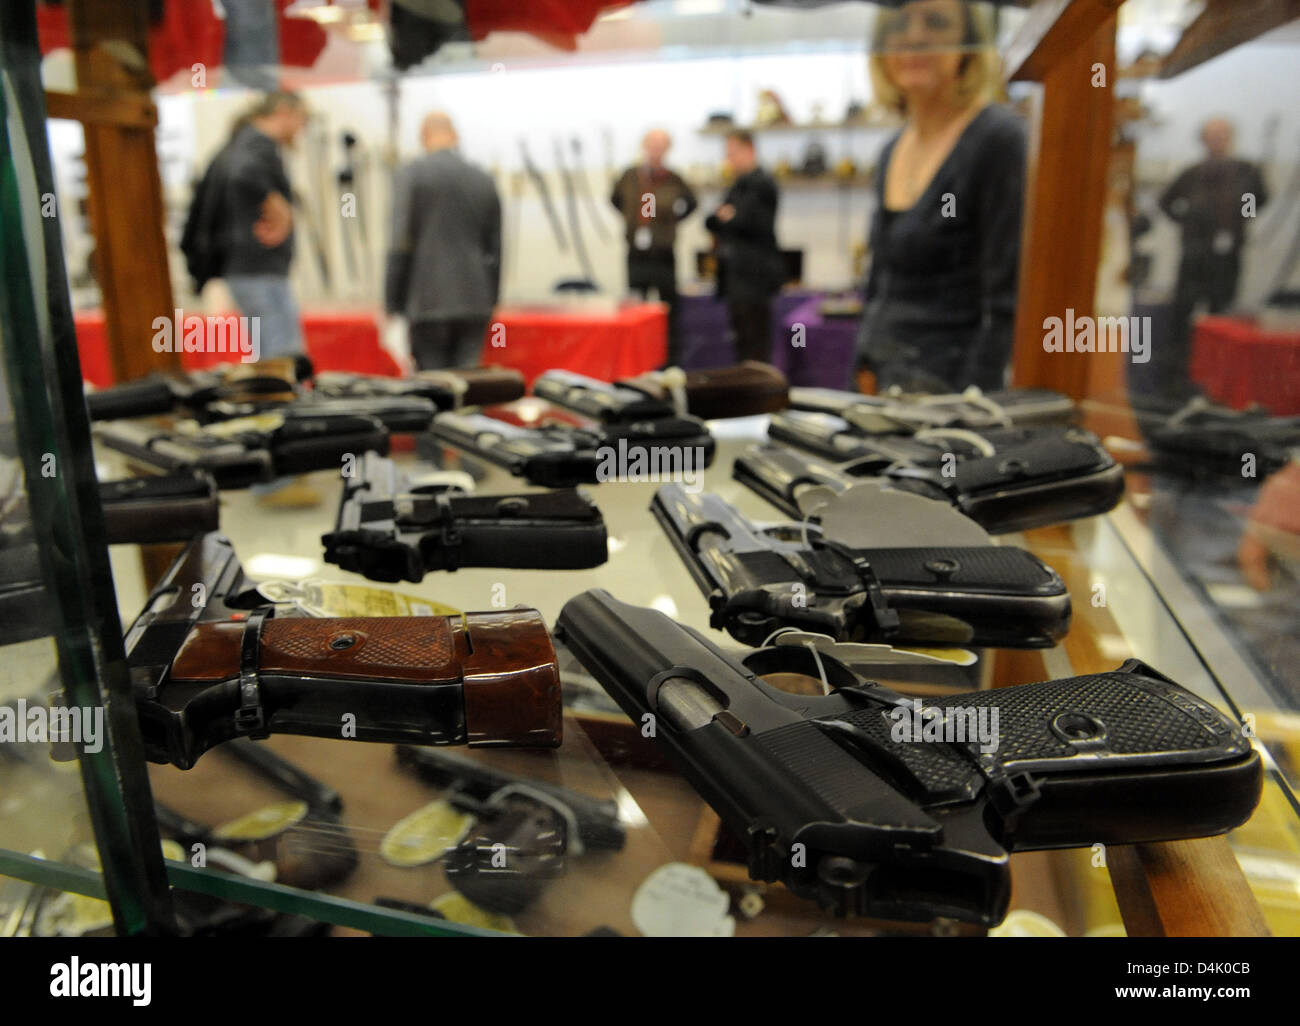 Officer?s pistols lie in the locked showcase of an exhibitor at the International Arms Fair in Sindelfingen, Germany, 14 March 2009. After the ramage shooting in Winnenden and Wendlingen with 16 dead, Sindelfingen tried to prevent the fair from taking place. The administration court in Stuttgart refused an interdiction of the fair, however. Photo: Norbert Foersterling Stock Photo